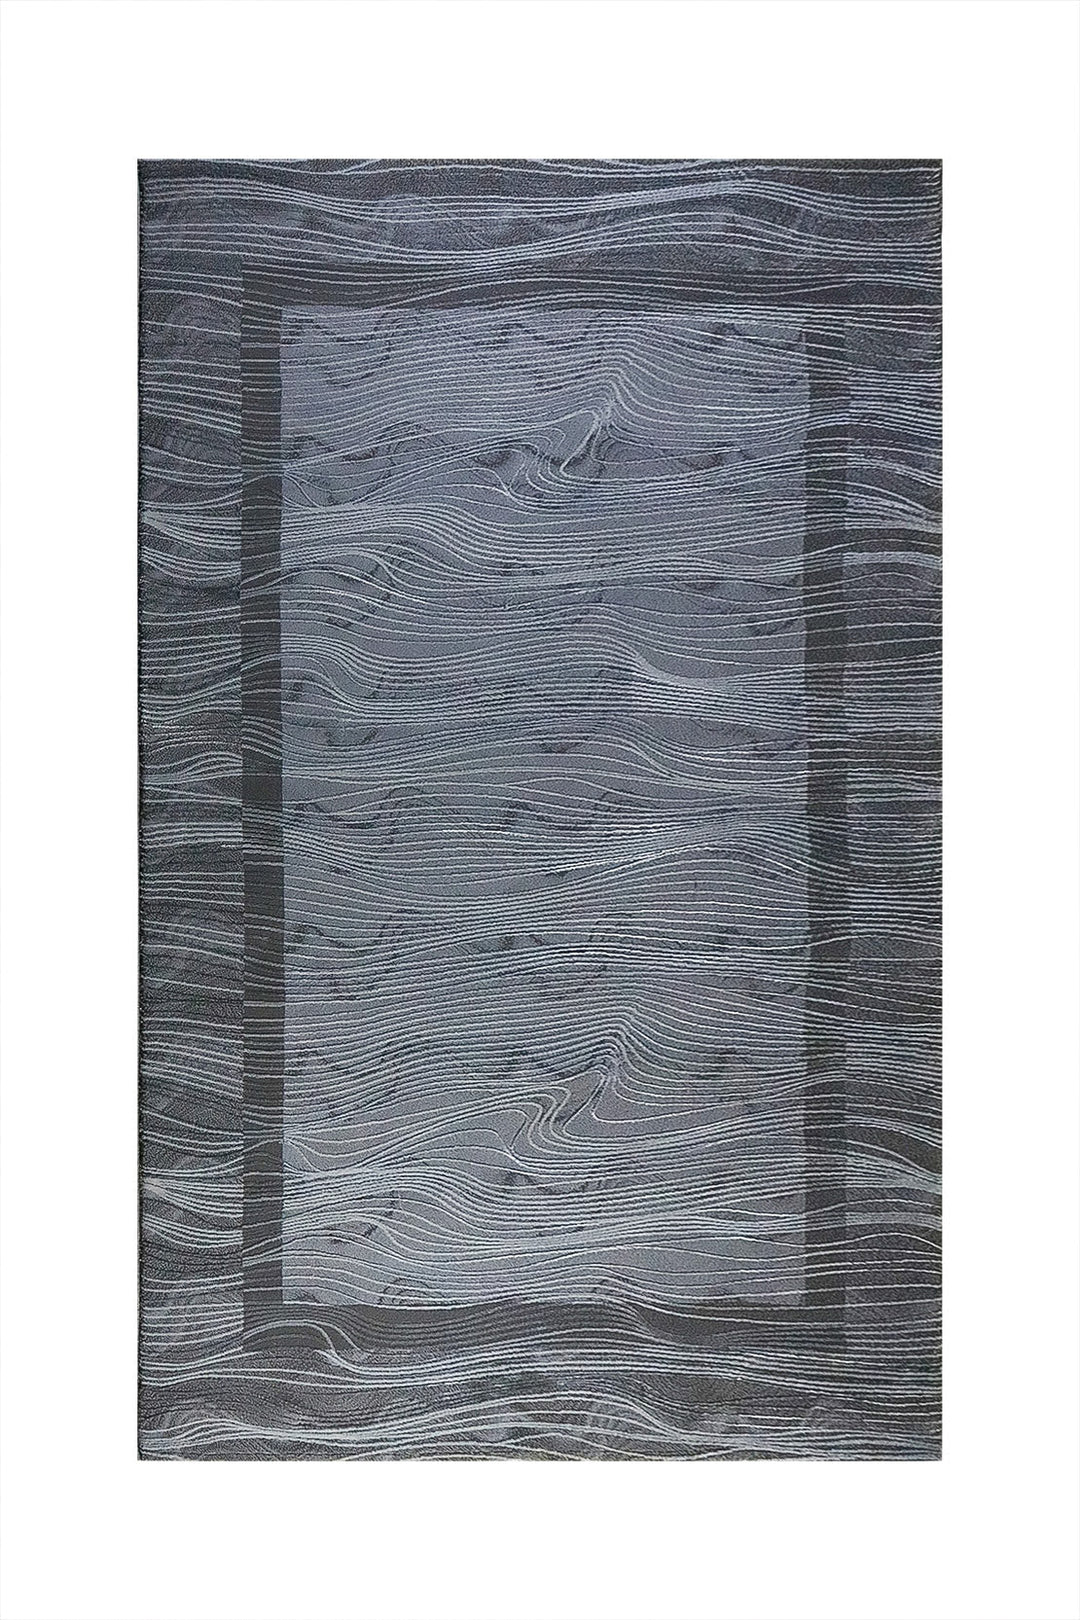 Premium Quality Turkish Astana Rug - 5.3 x 7.5 FT - Gray - Resilient Construction for Long-Lasting Use - V Surfaces